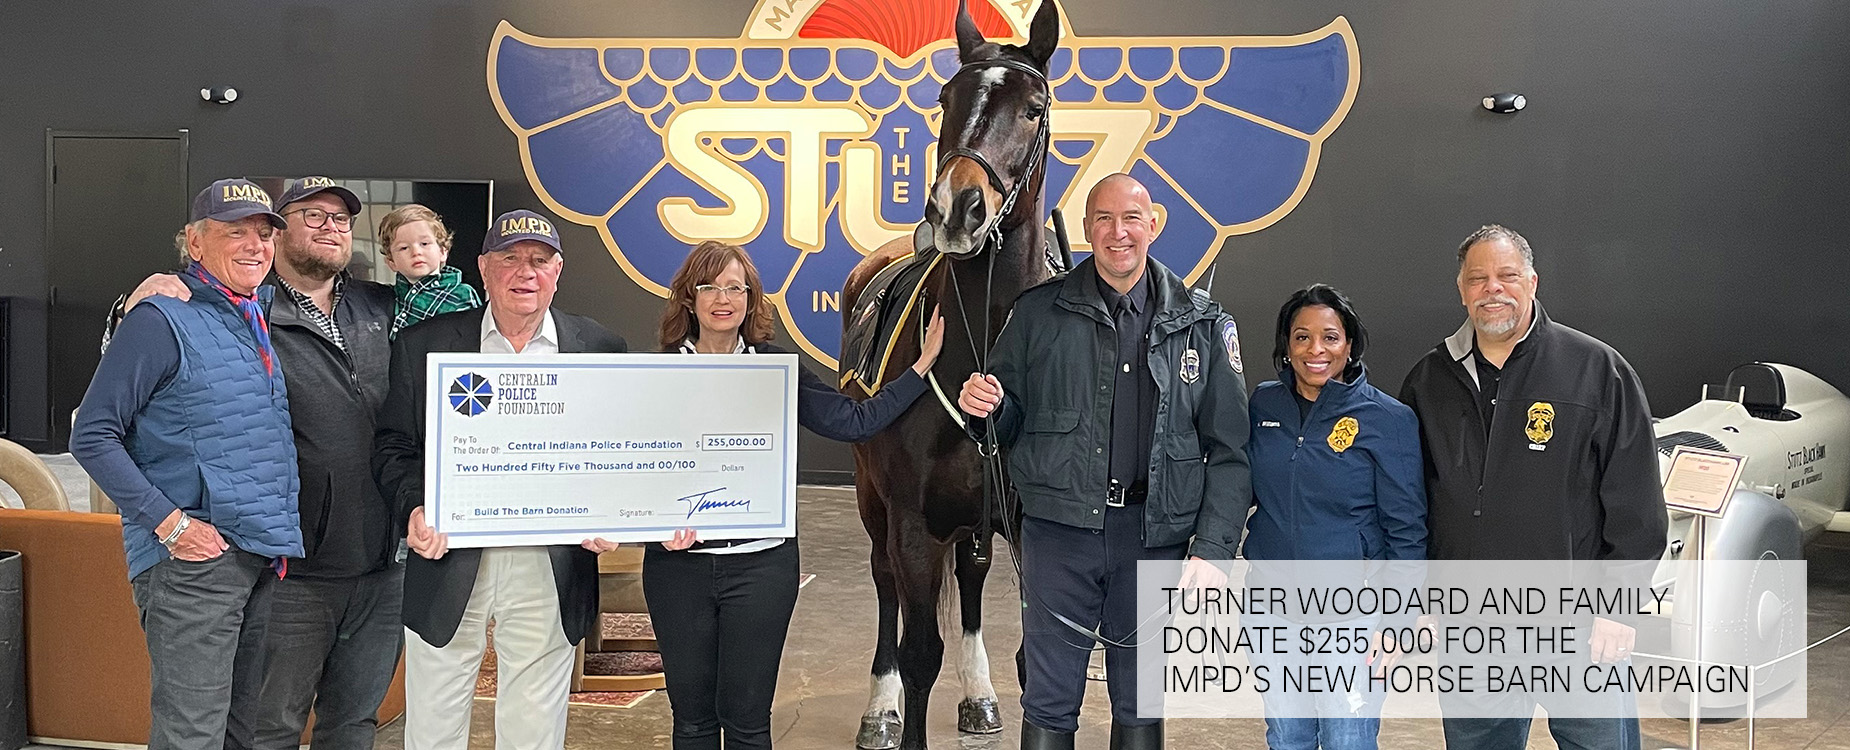 Turner Woodard And Family Donate $255,000 For The Indianapolis Metropolitan Police Department Mounted Patrol’s New Horse Barn Campaign